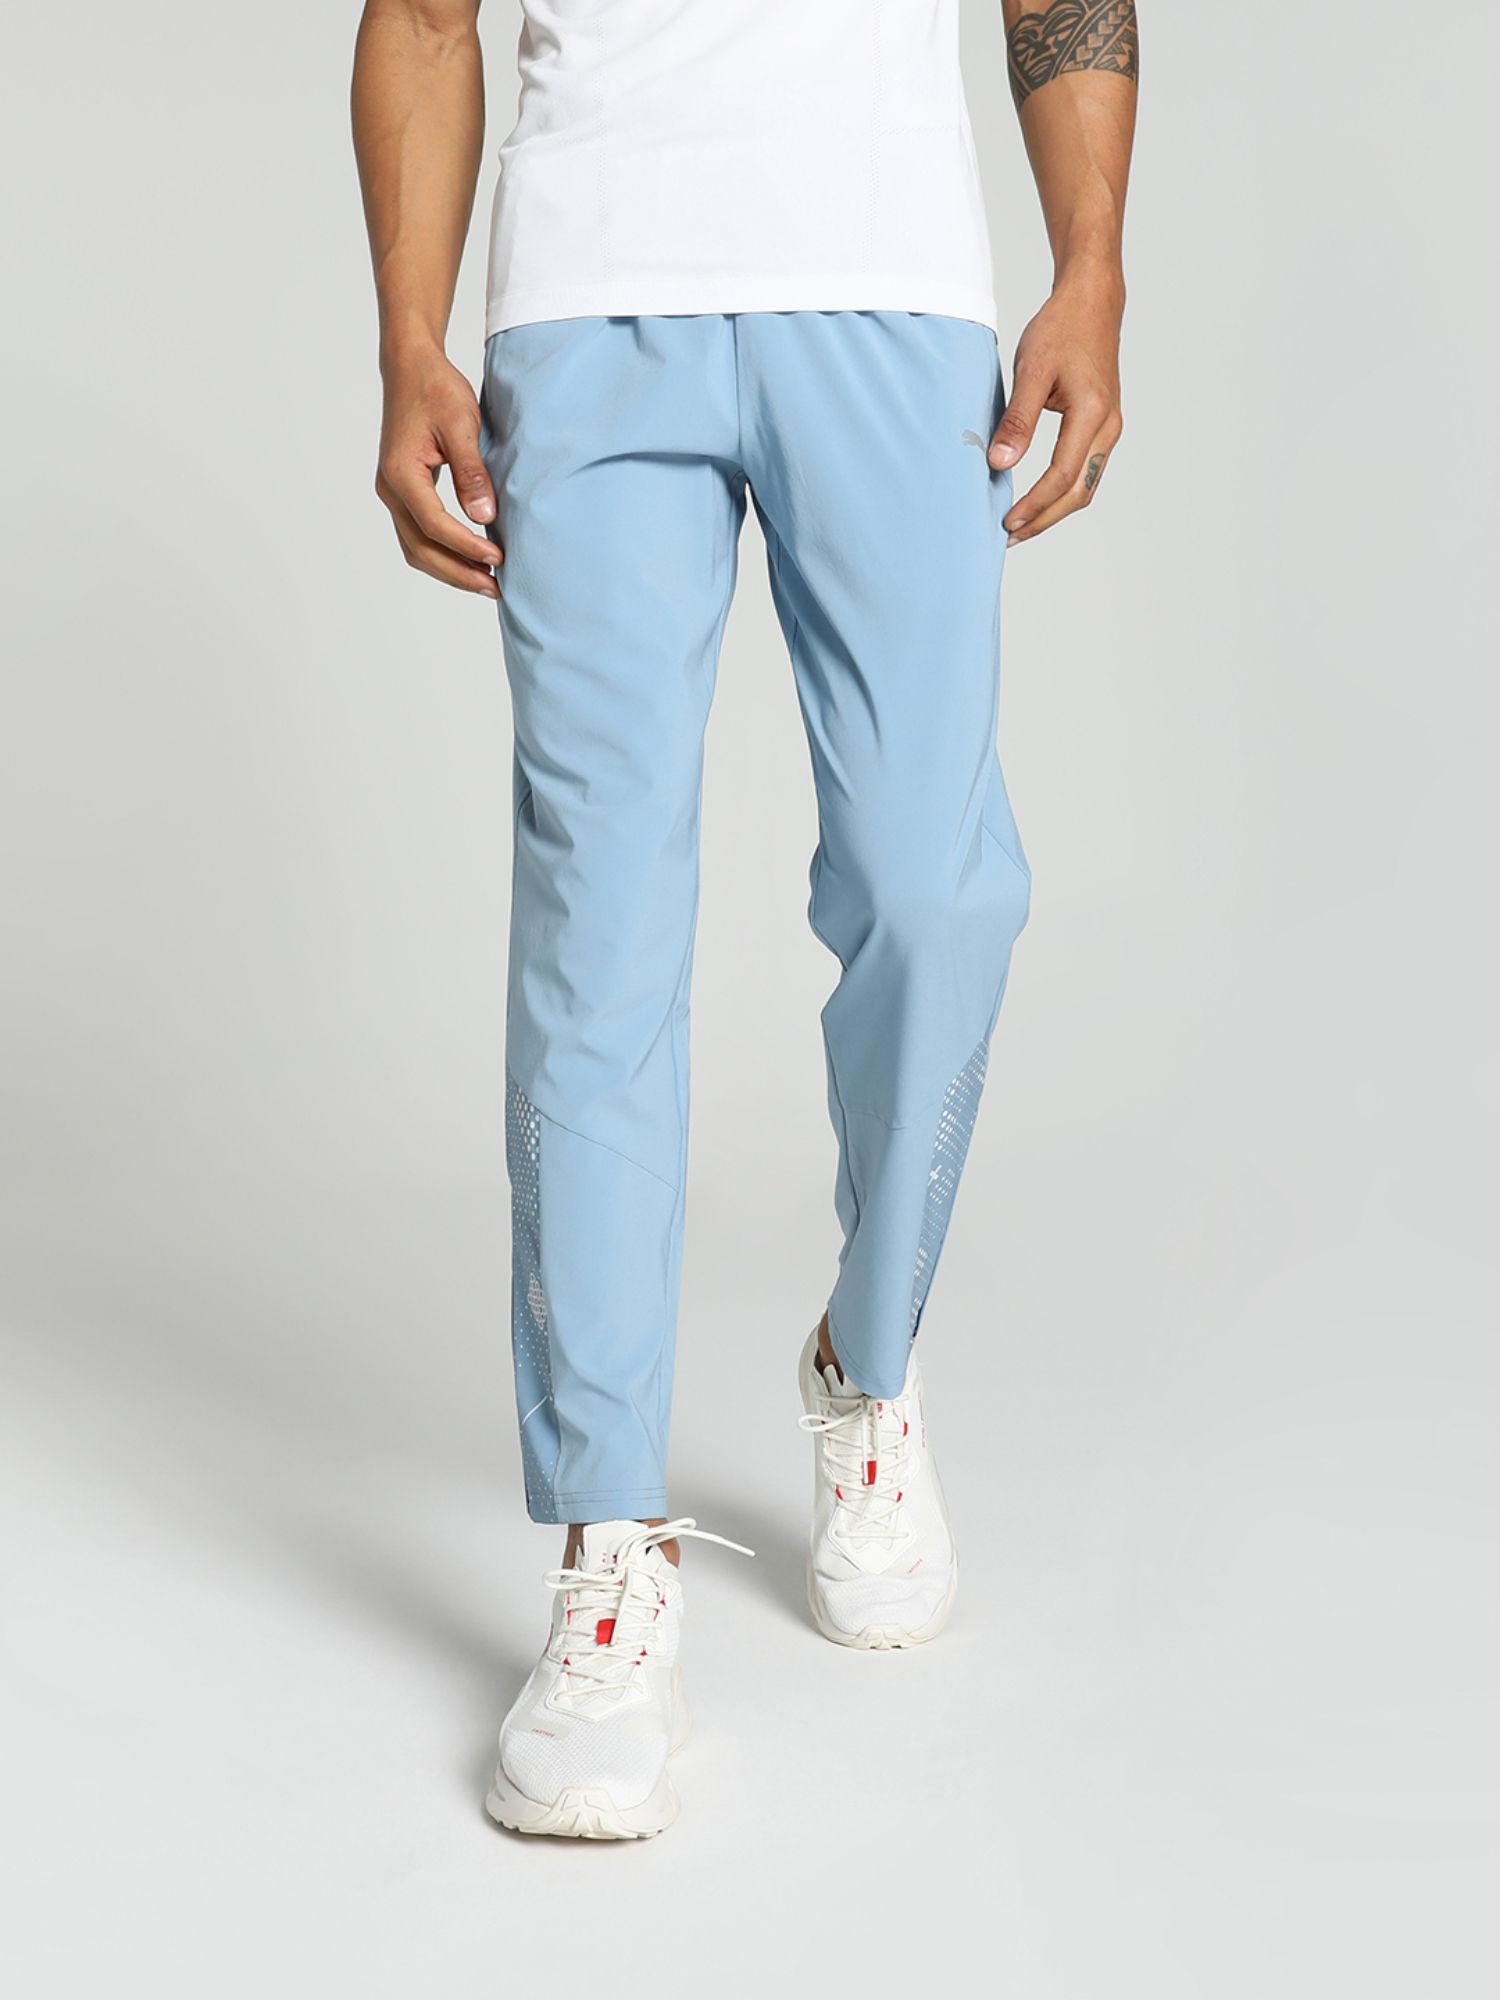 x-one8-woven-mens-blue-trackpant